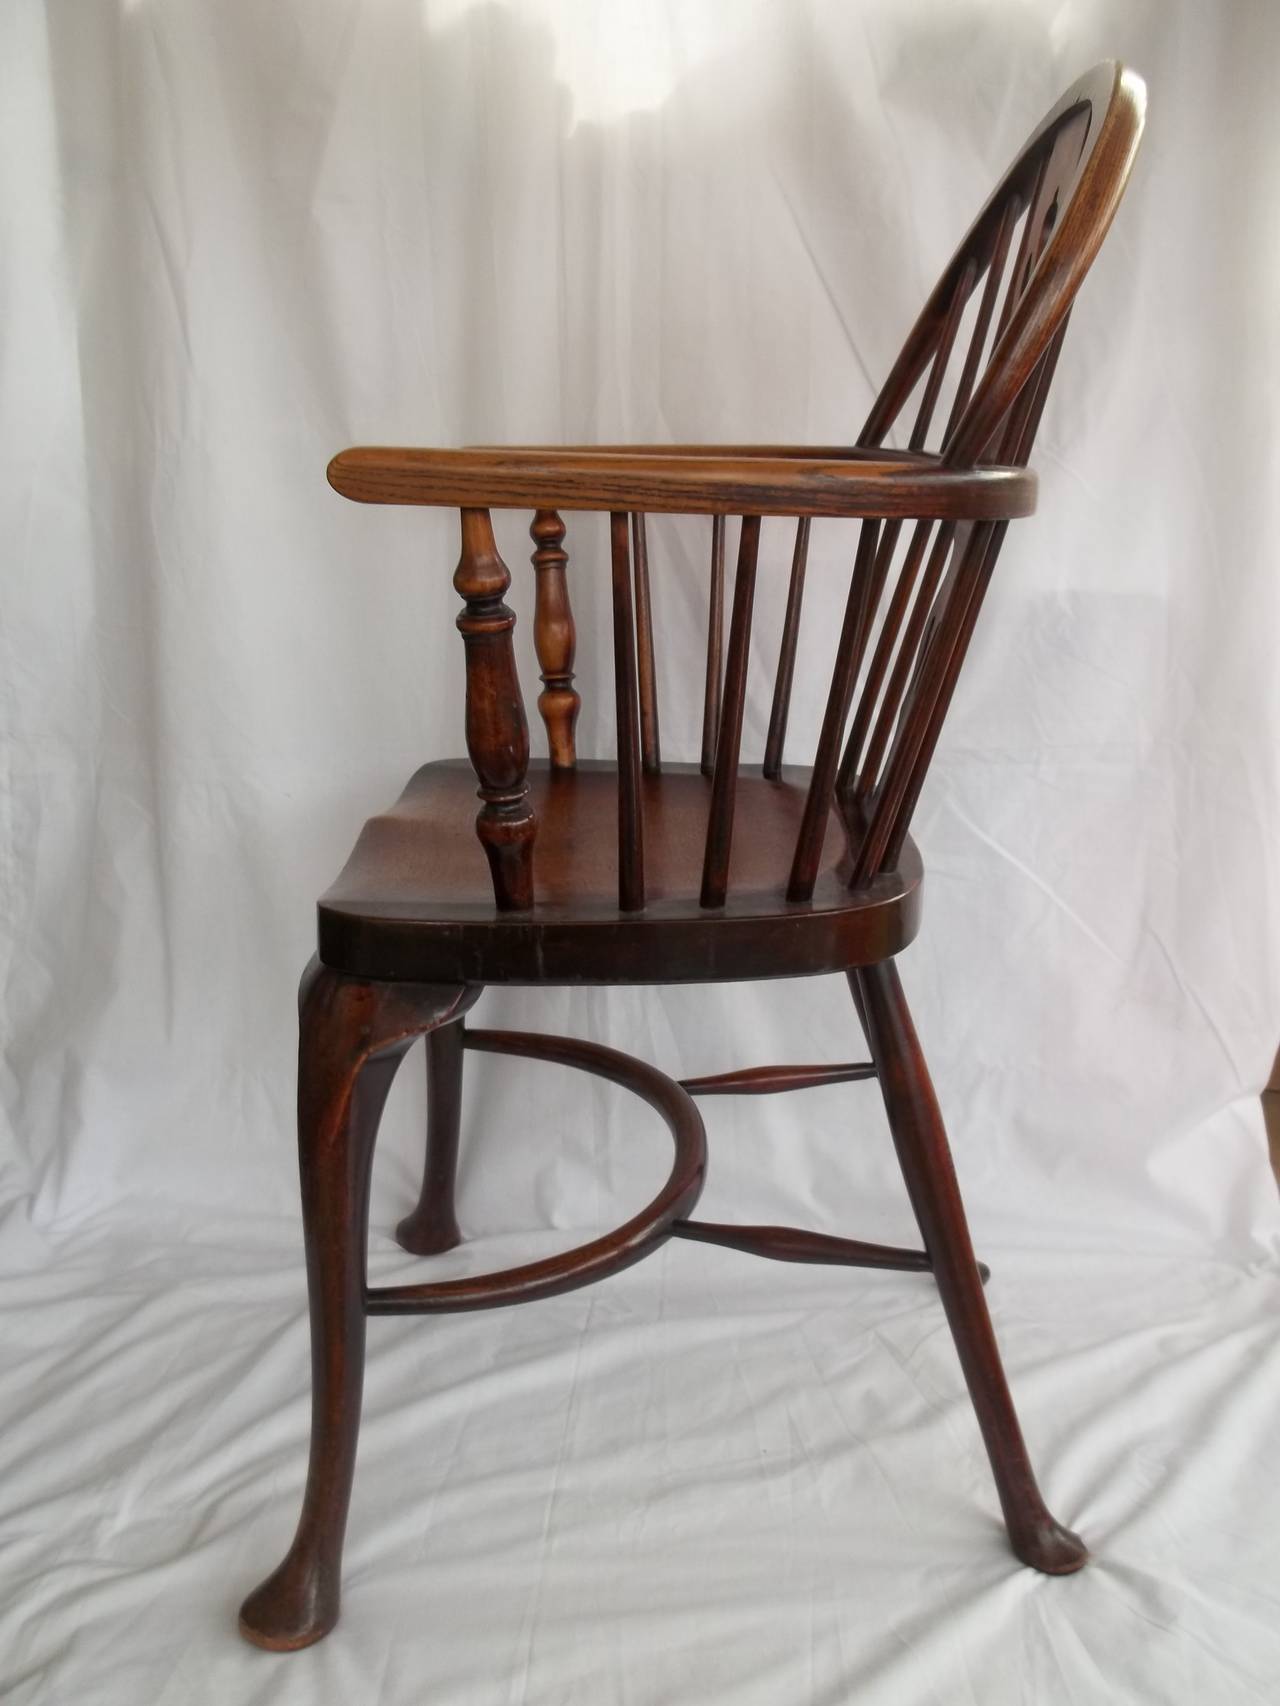 British 19th Century Low-Back Windsor Armchair with Cabriole Legs